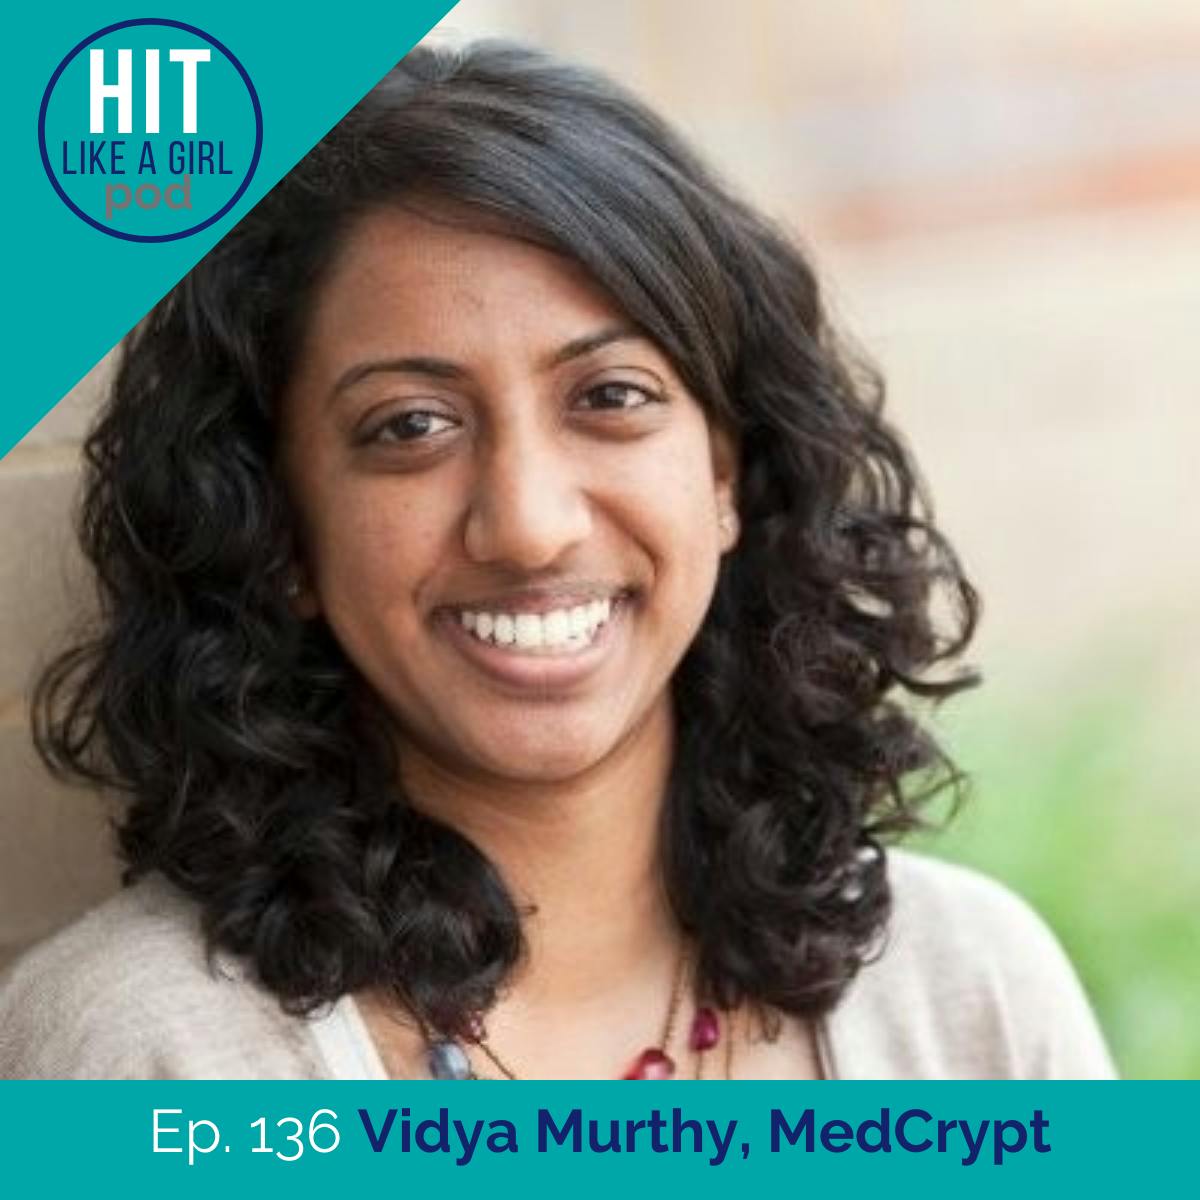 Vidya Murthy Discusses Risk Reduction in Medical Devices Deployed in Medical Settings